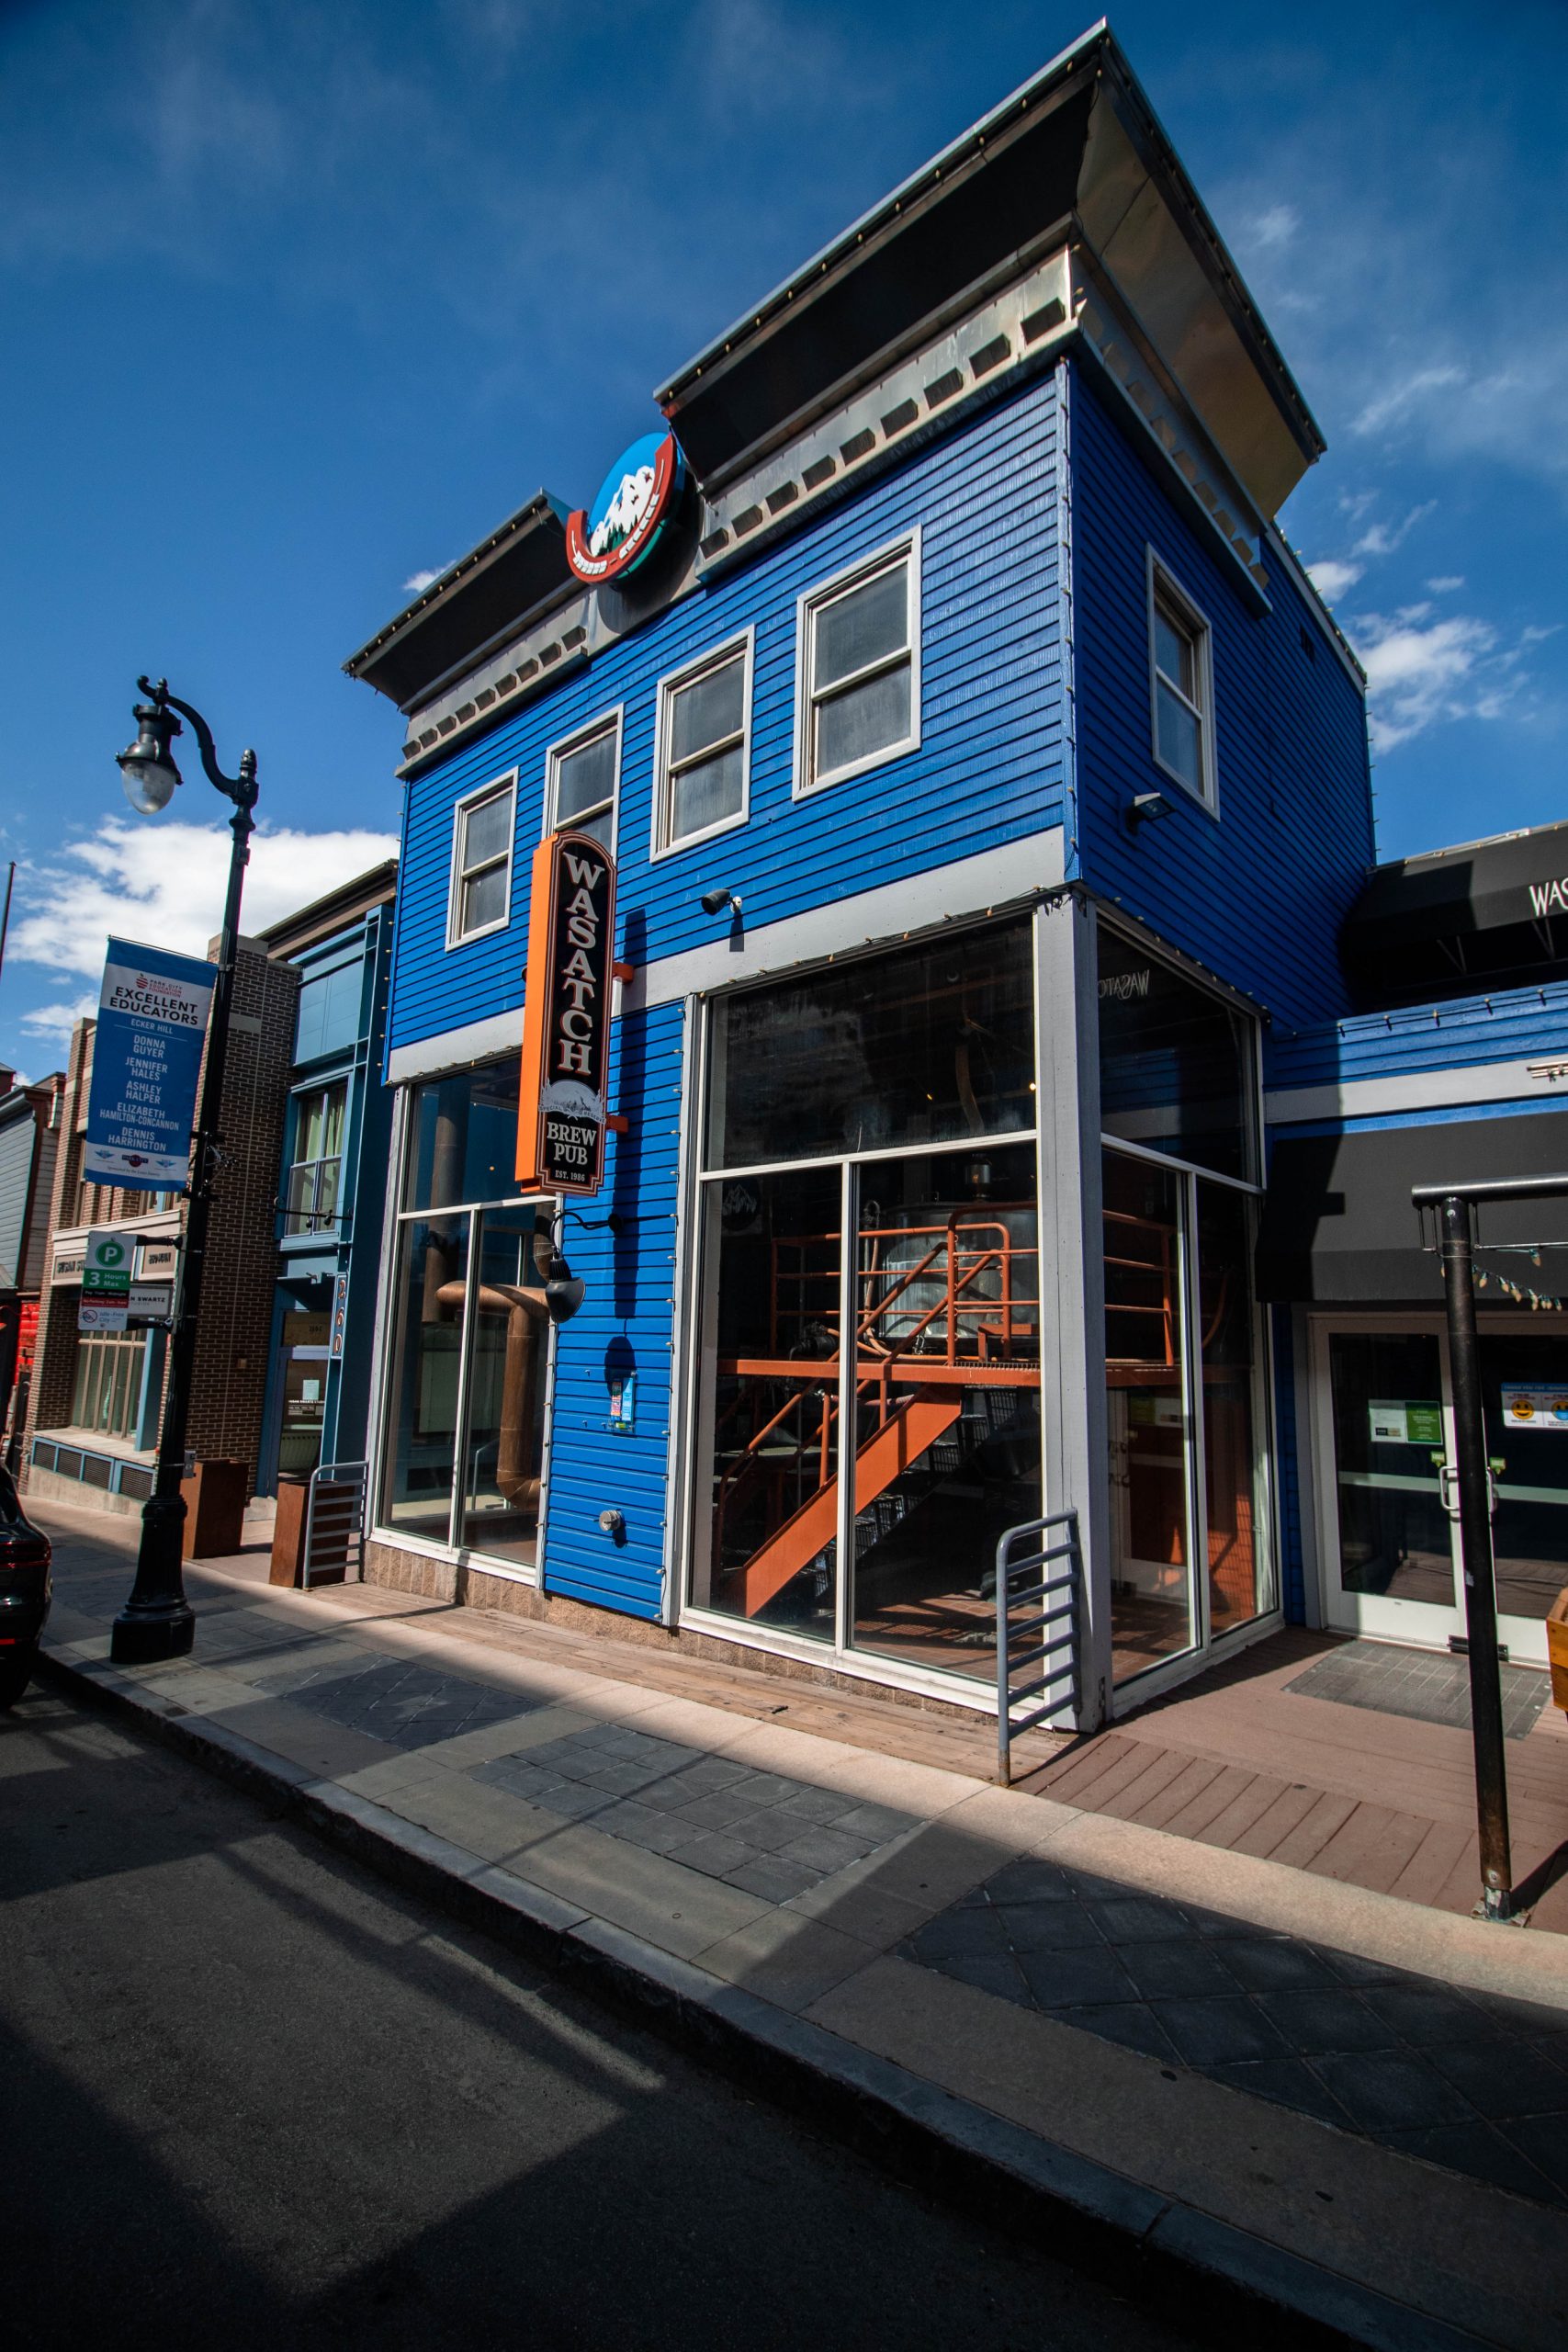 You can't miss the bright blue exterior of Wasatch Brewery when strolling through Main Street!